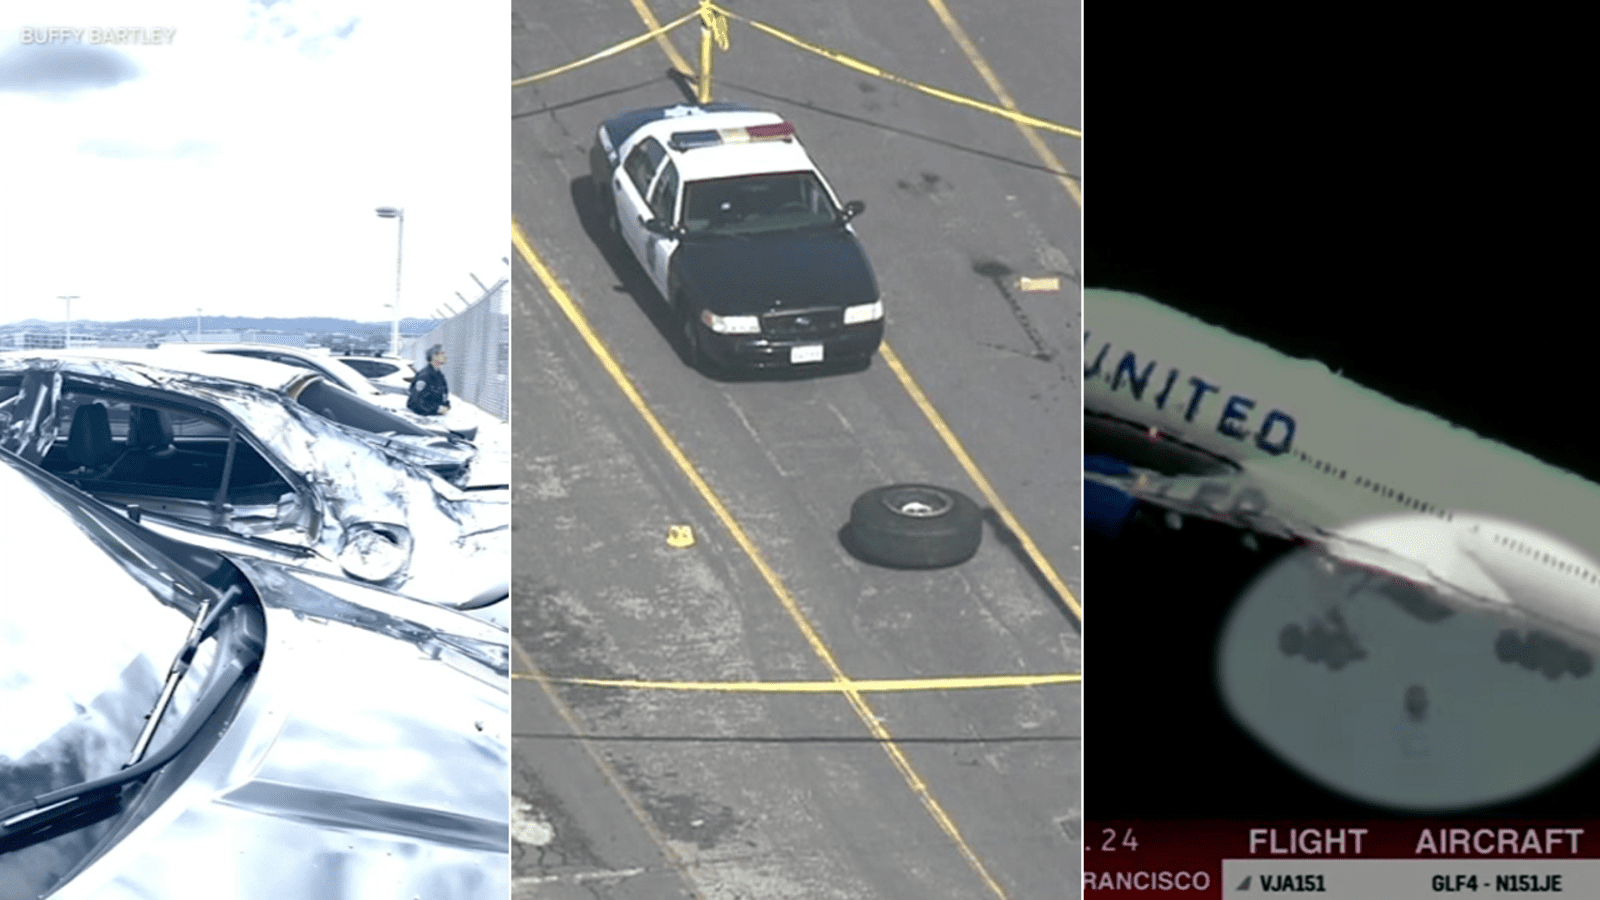 Say What Now? Tire Falls Off United Airlines Flight After takeoff from San Francisco